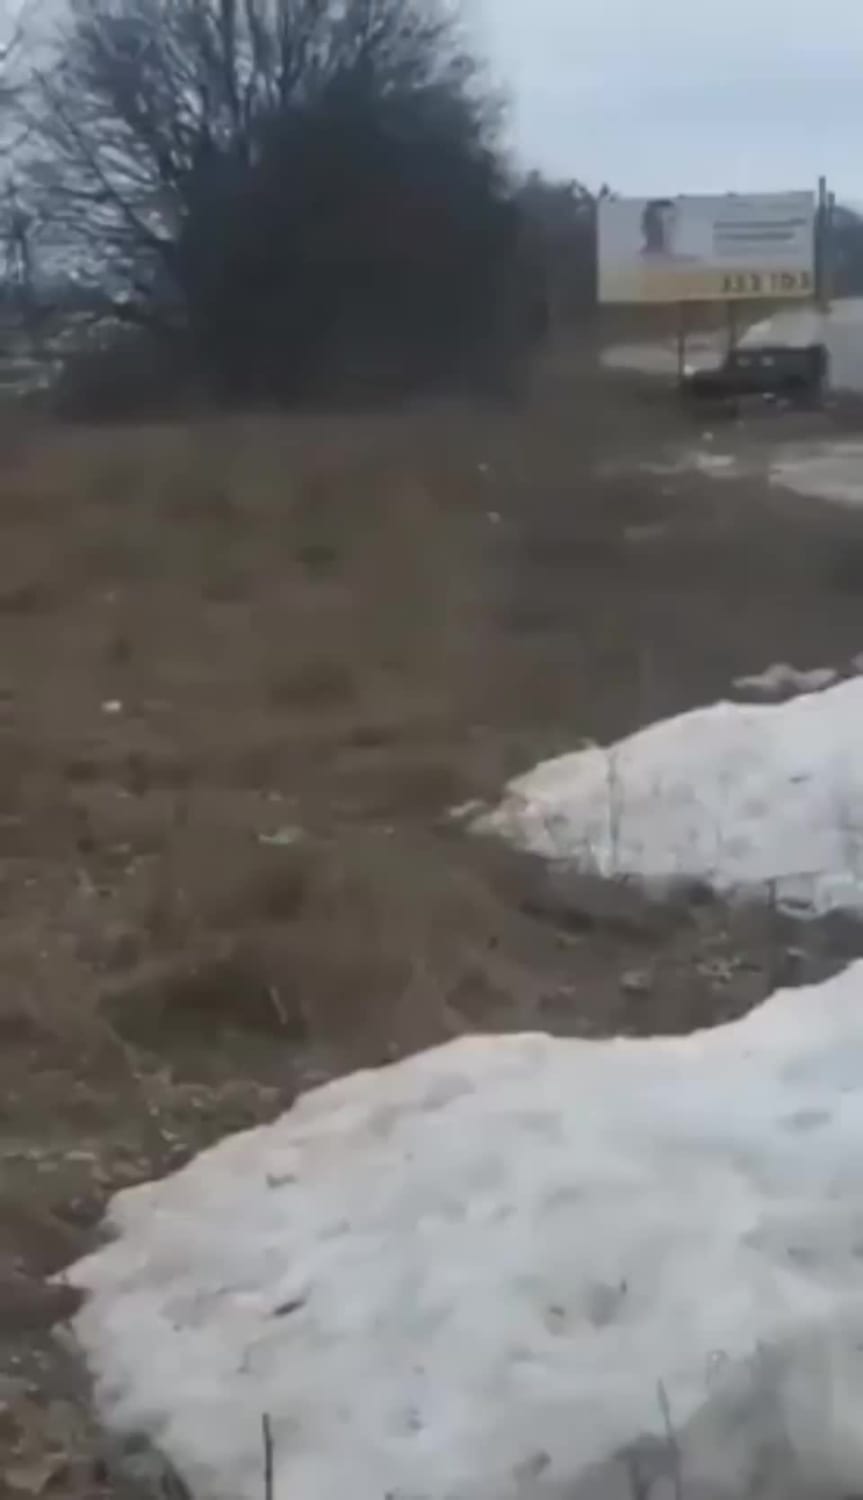 Ukranian soldier takes down a Russian tank